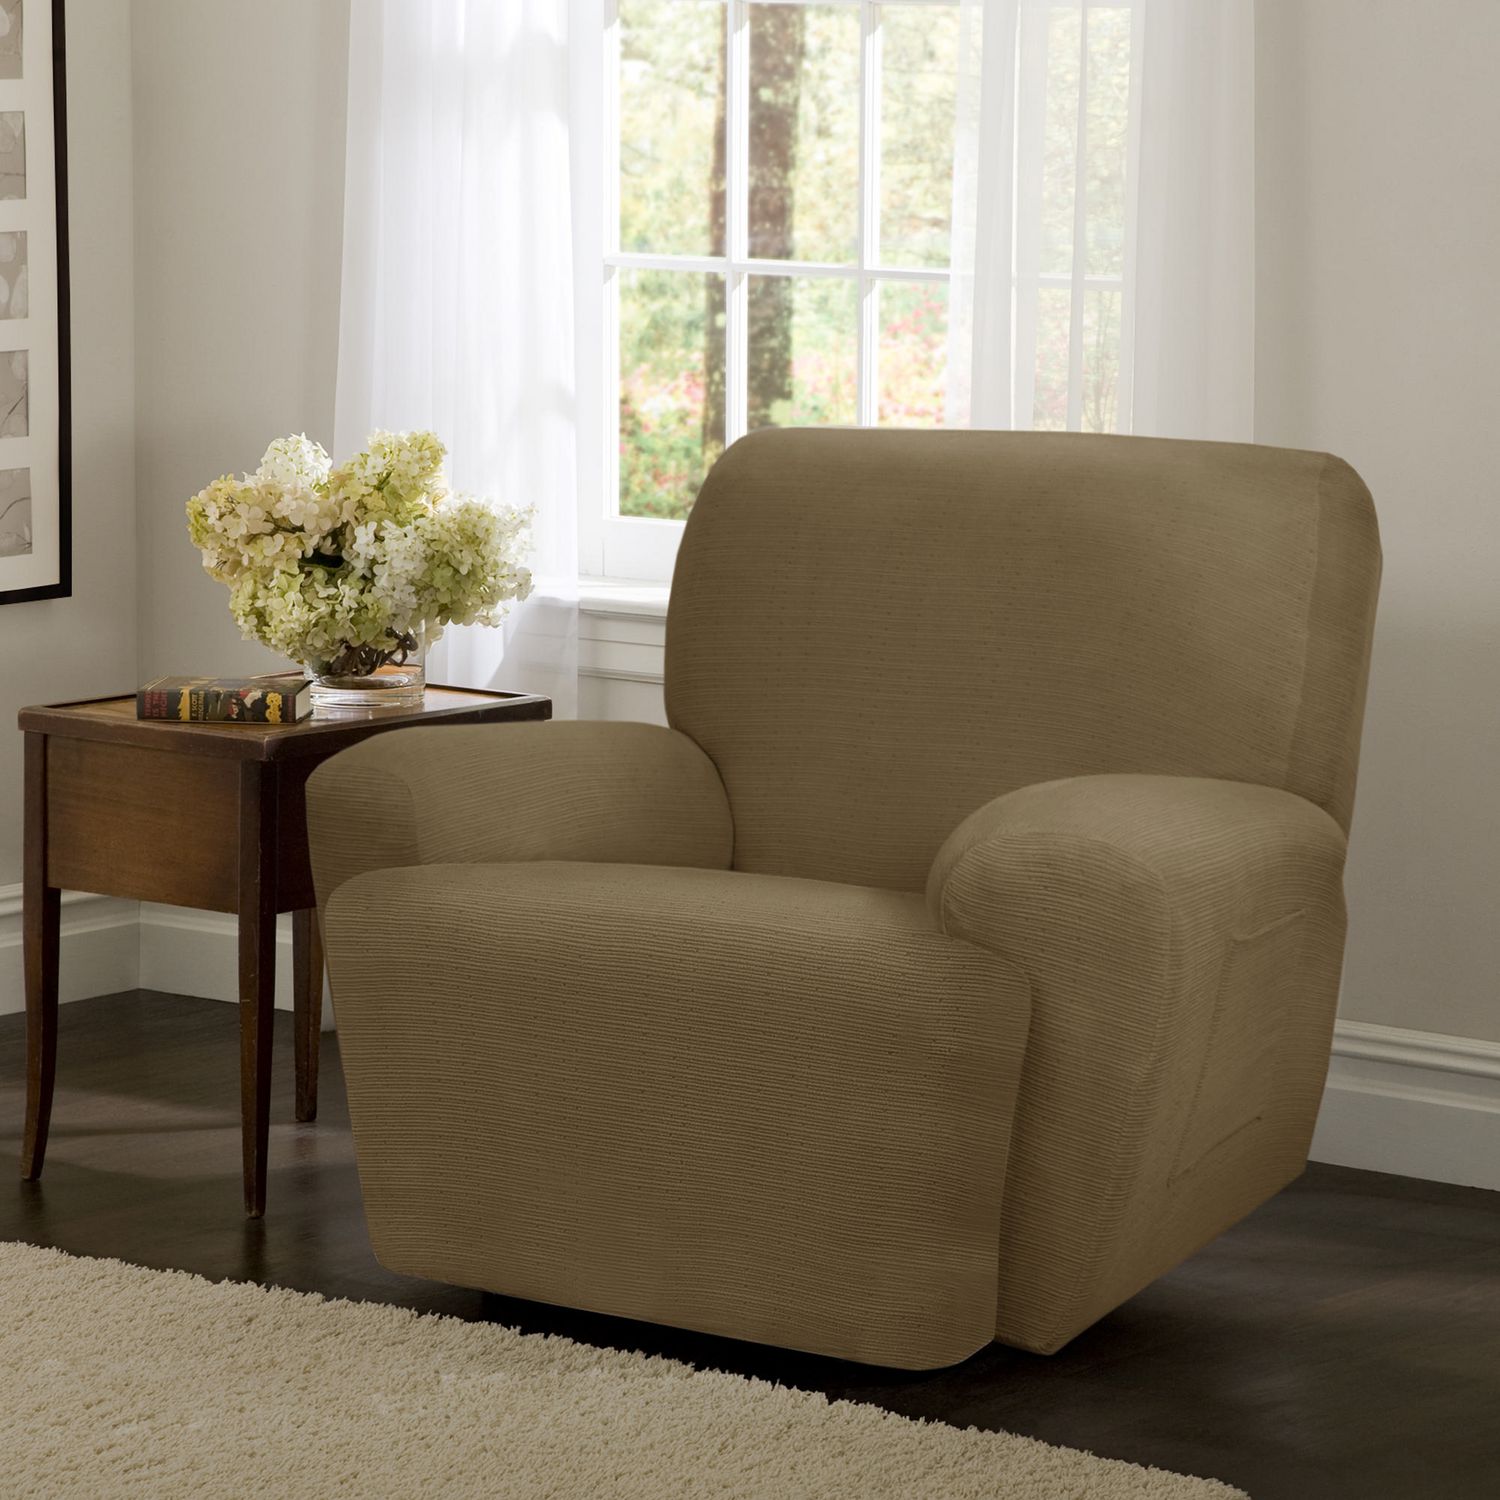 Mainstays Newman Stretch 1 Piece Recliner Slipcover Gold ...